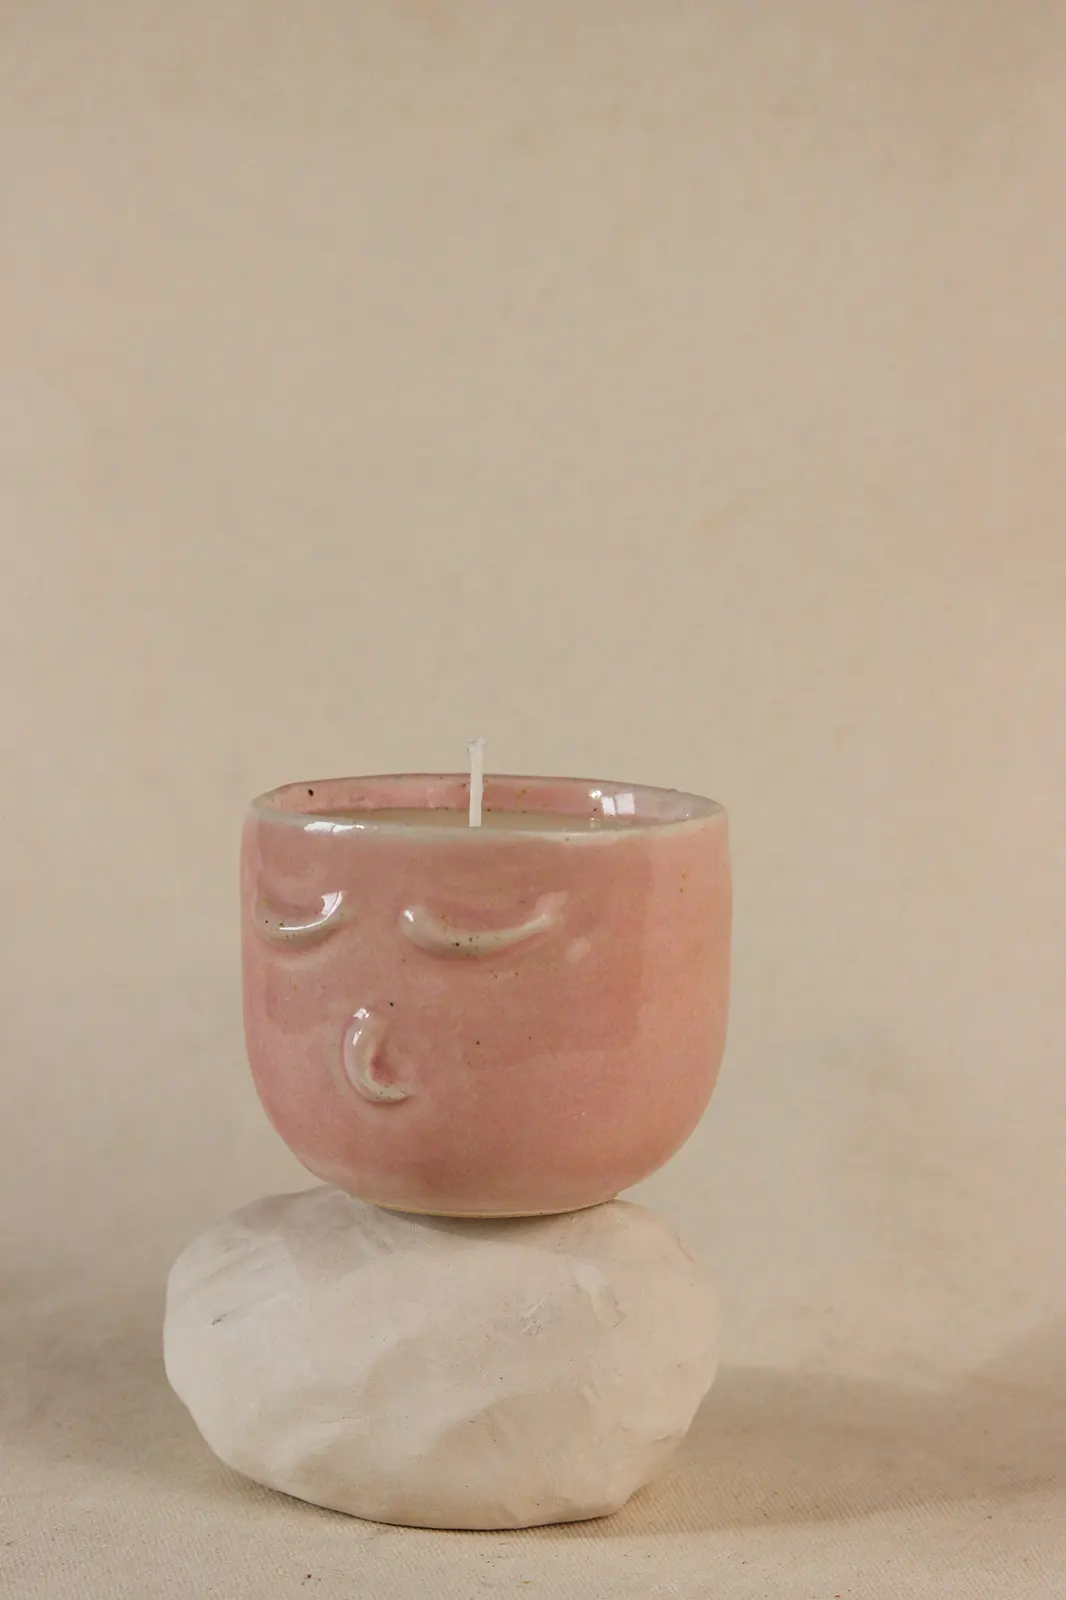 The priest ceramic face jar candle hygge, ceramic jar candle, candle in a jar, scented candle in a jar, natural scented candle, soy wax candles, candles, scented candle online, scent candle, wax candles, aromatic candles, jar candles, scented candles near me, Toh, Sepia stories